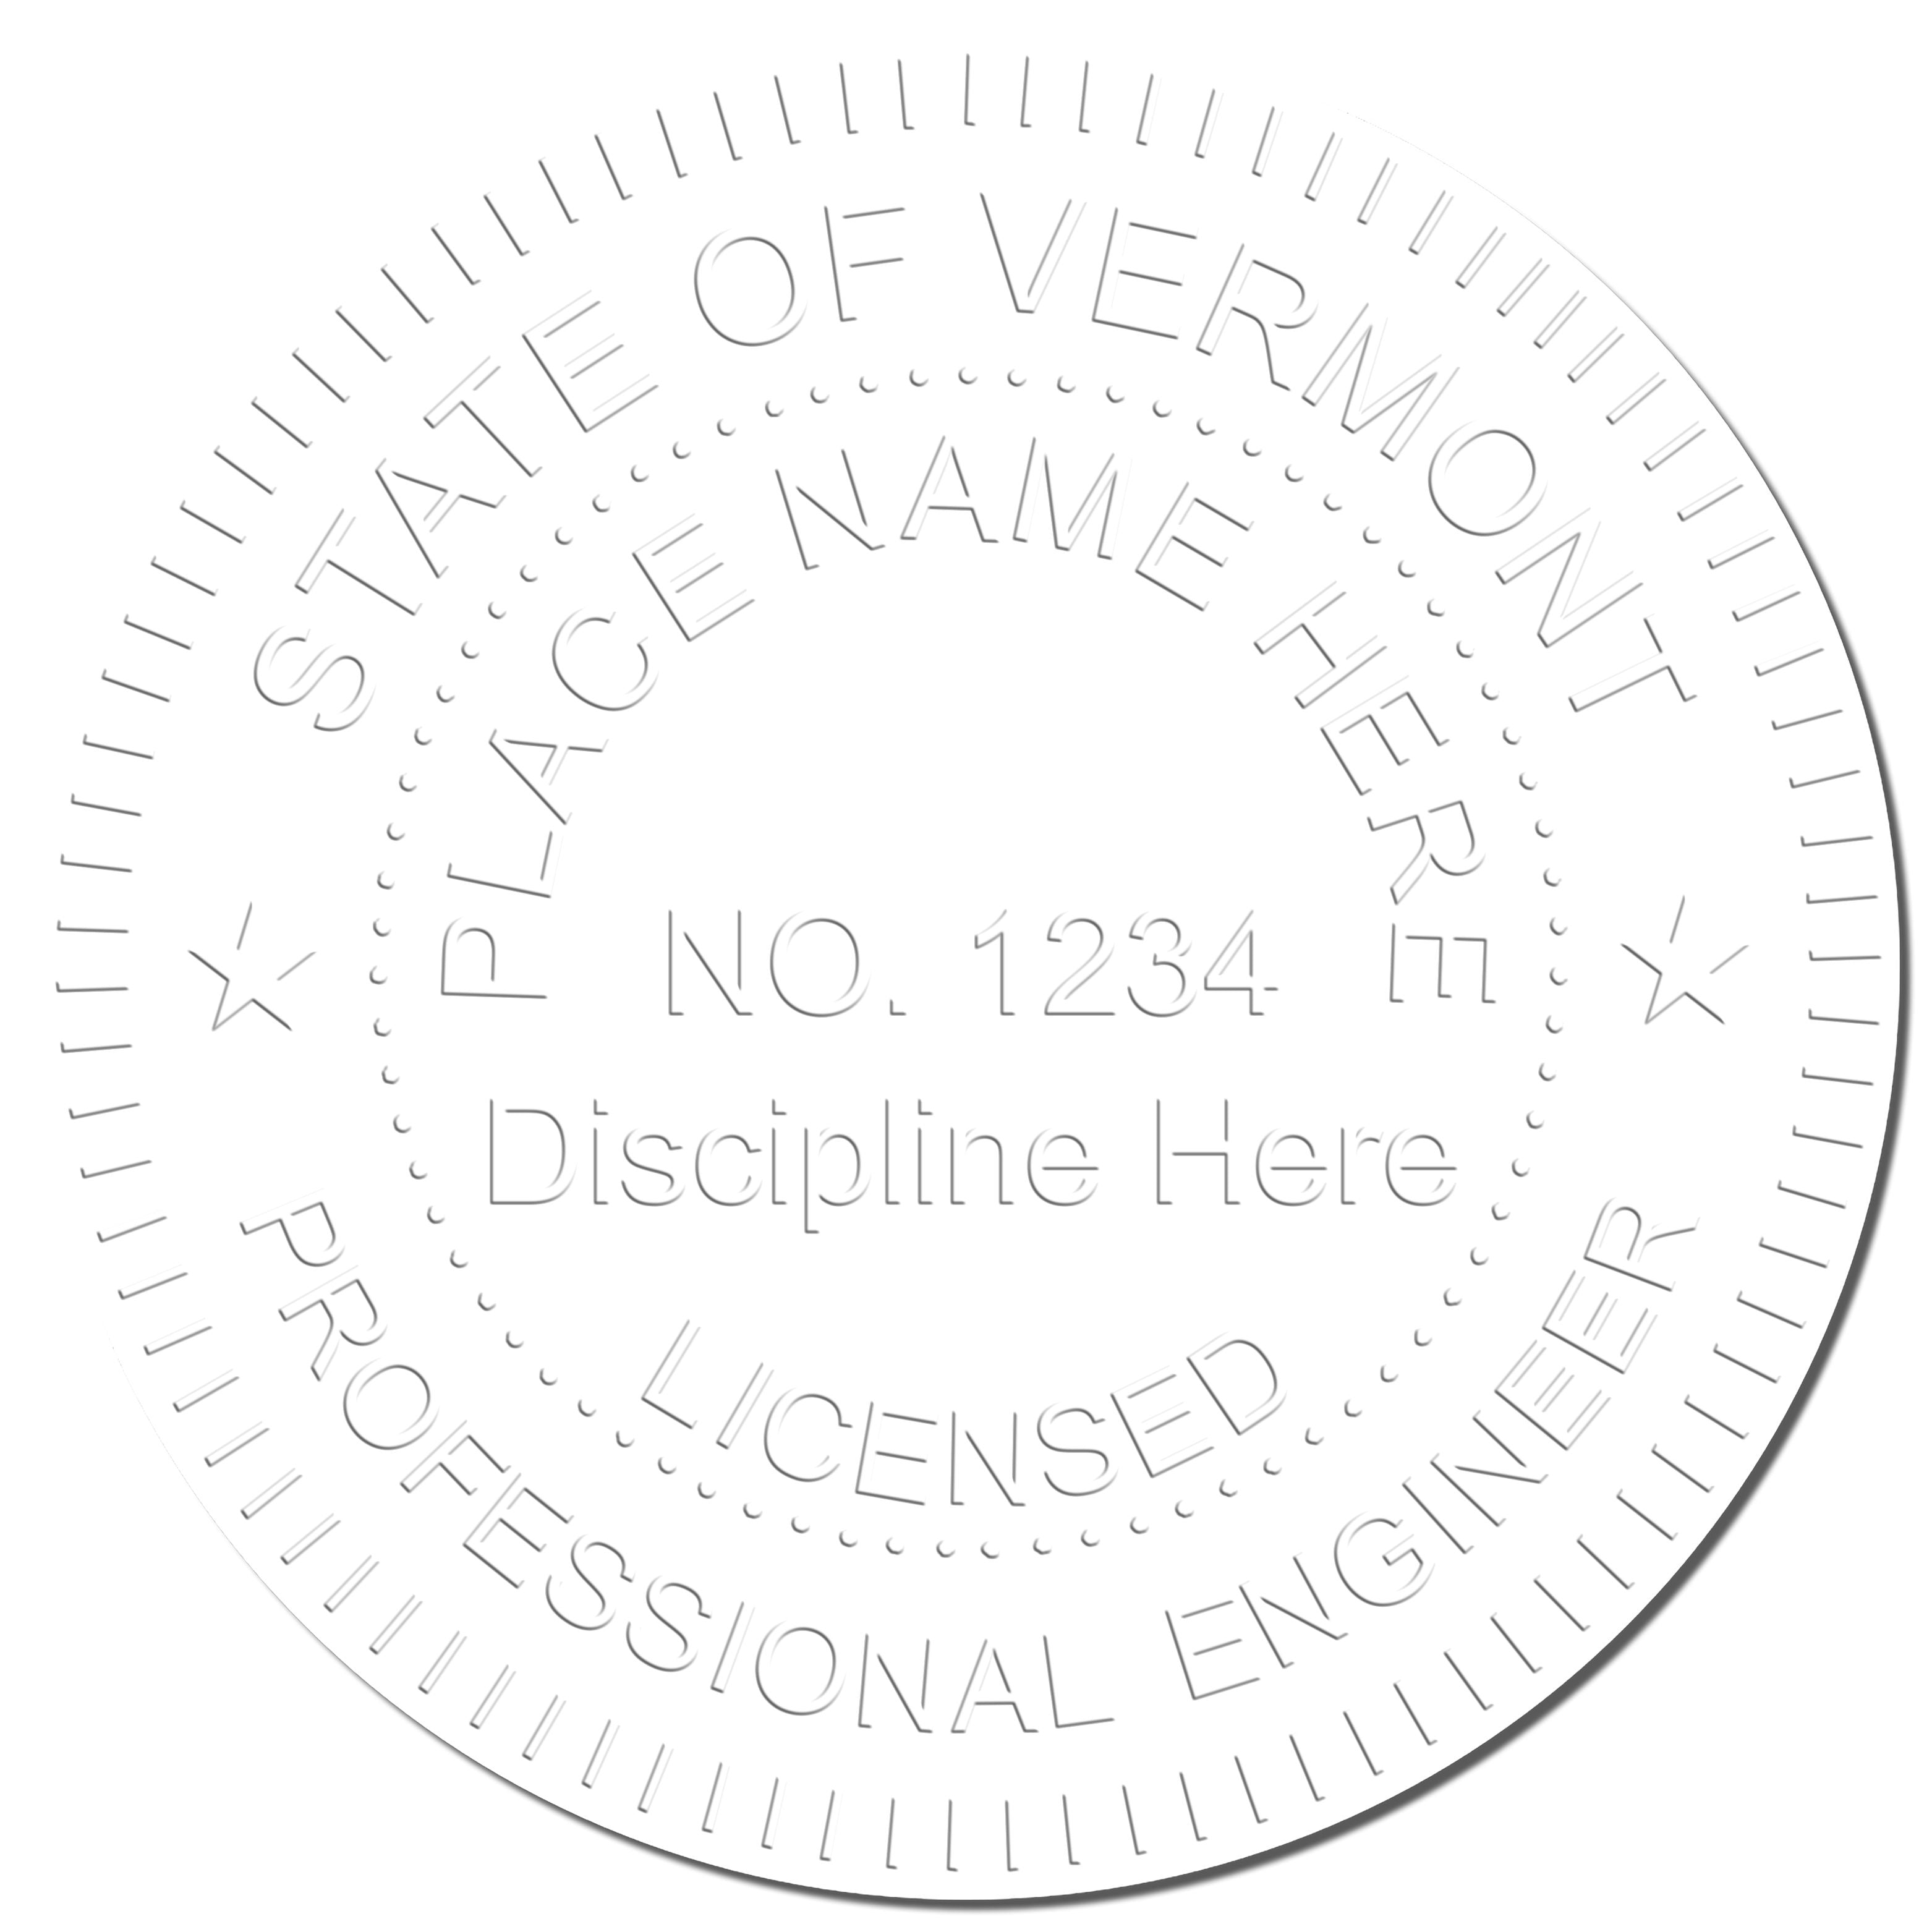 This paper is stamped with a sample imprint of the Hybrid Vermont Engineer Seal, signifying its quality and reliability.